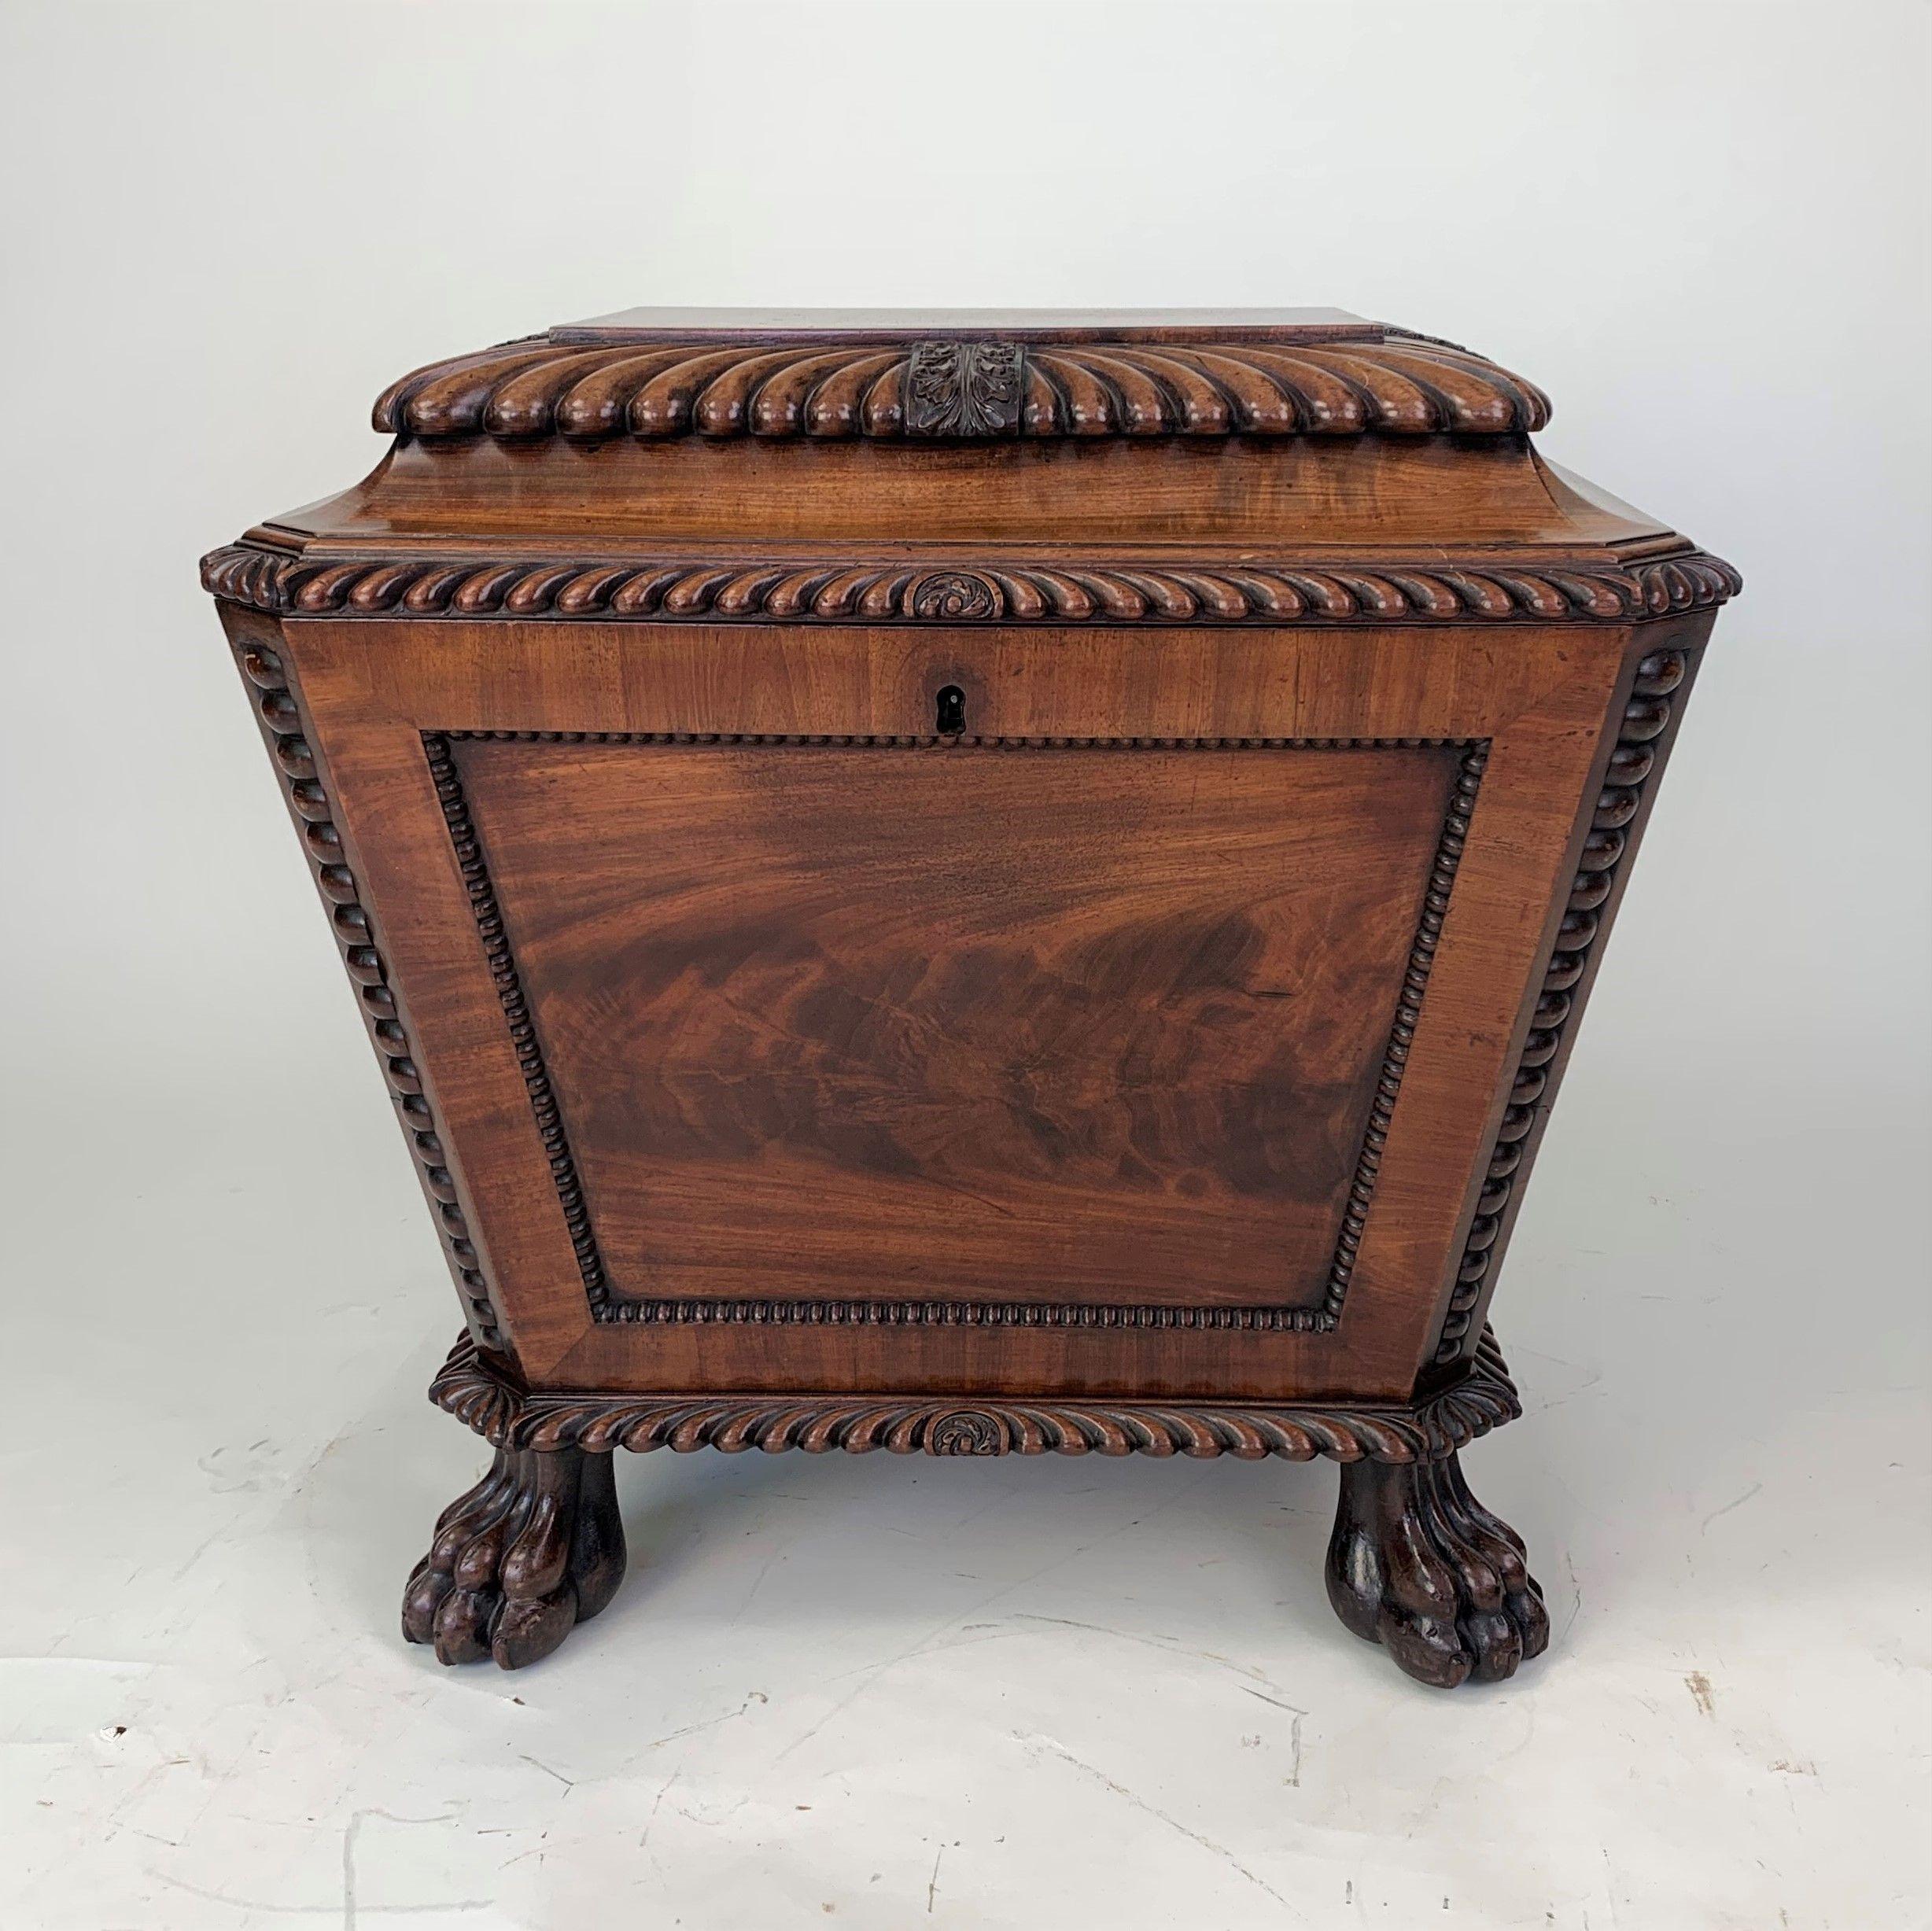 19th Century Regency Wine Cooler/Cellarette Attributed to Gillows For Sale